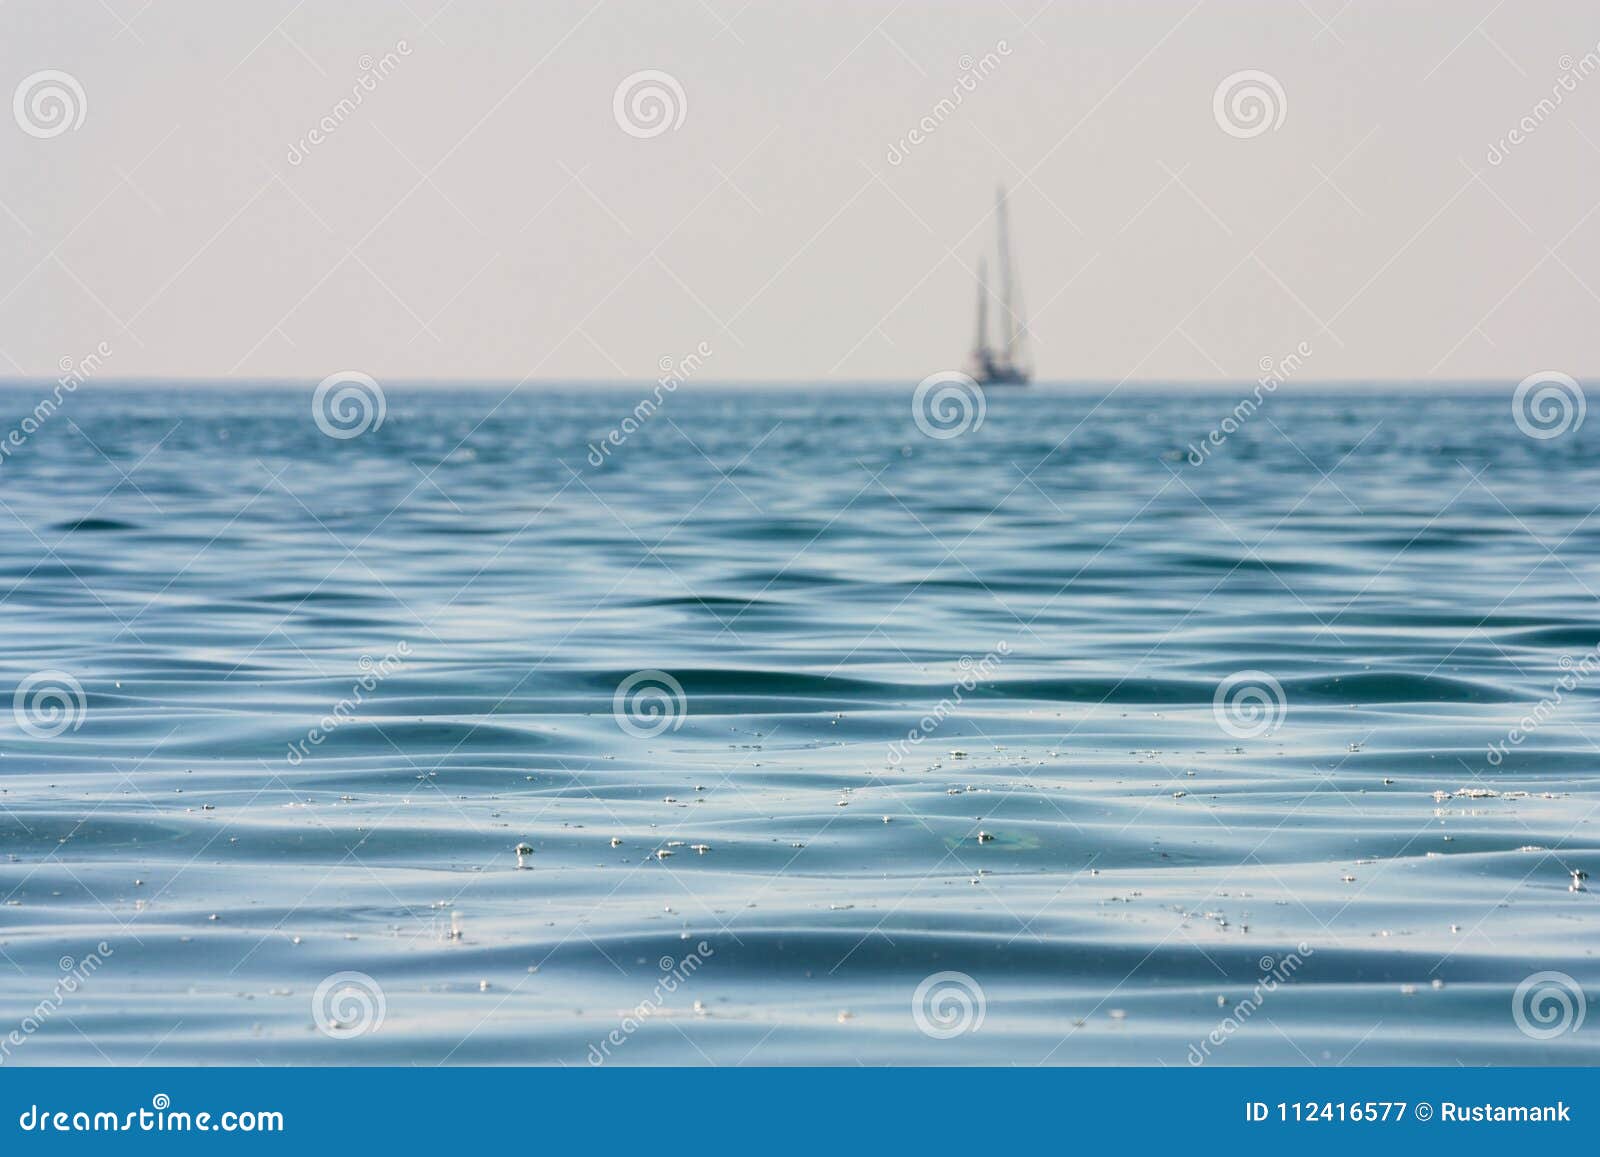 beautiful seascape - view of morning sea with a sailboat on horizon in the bay next to of ancient phaselis, coast of the mediterra